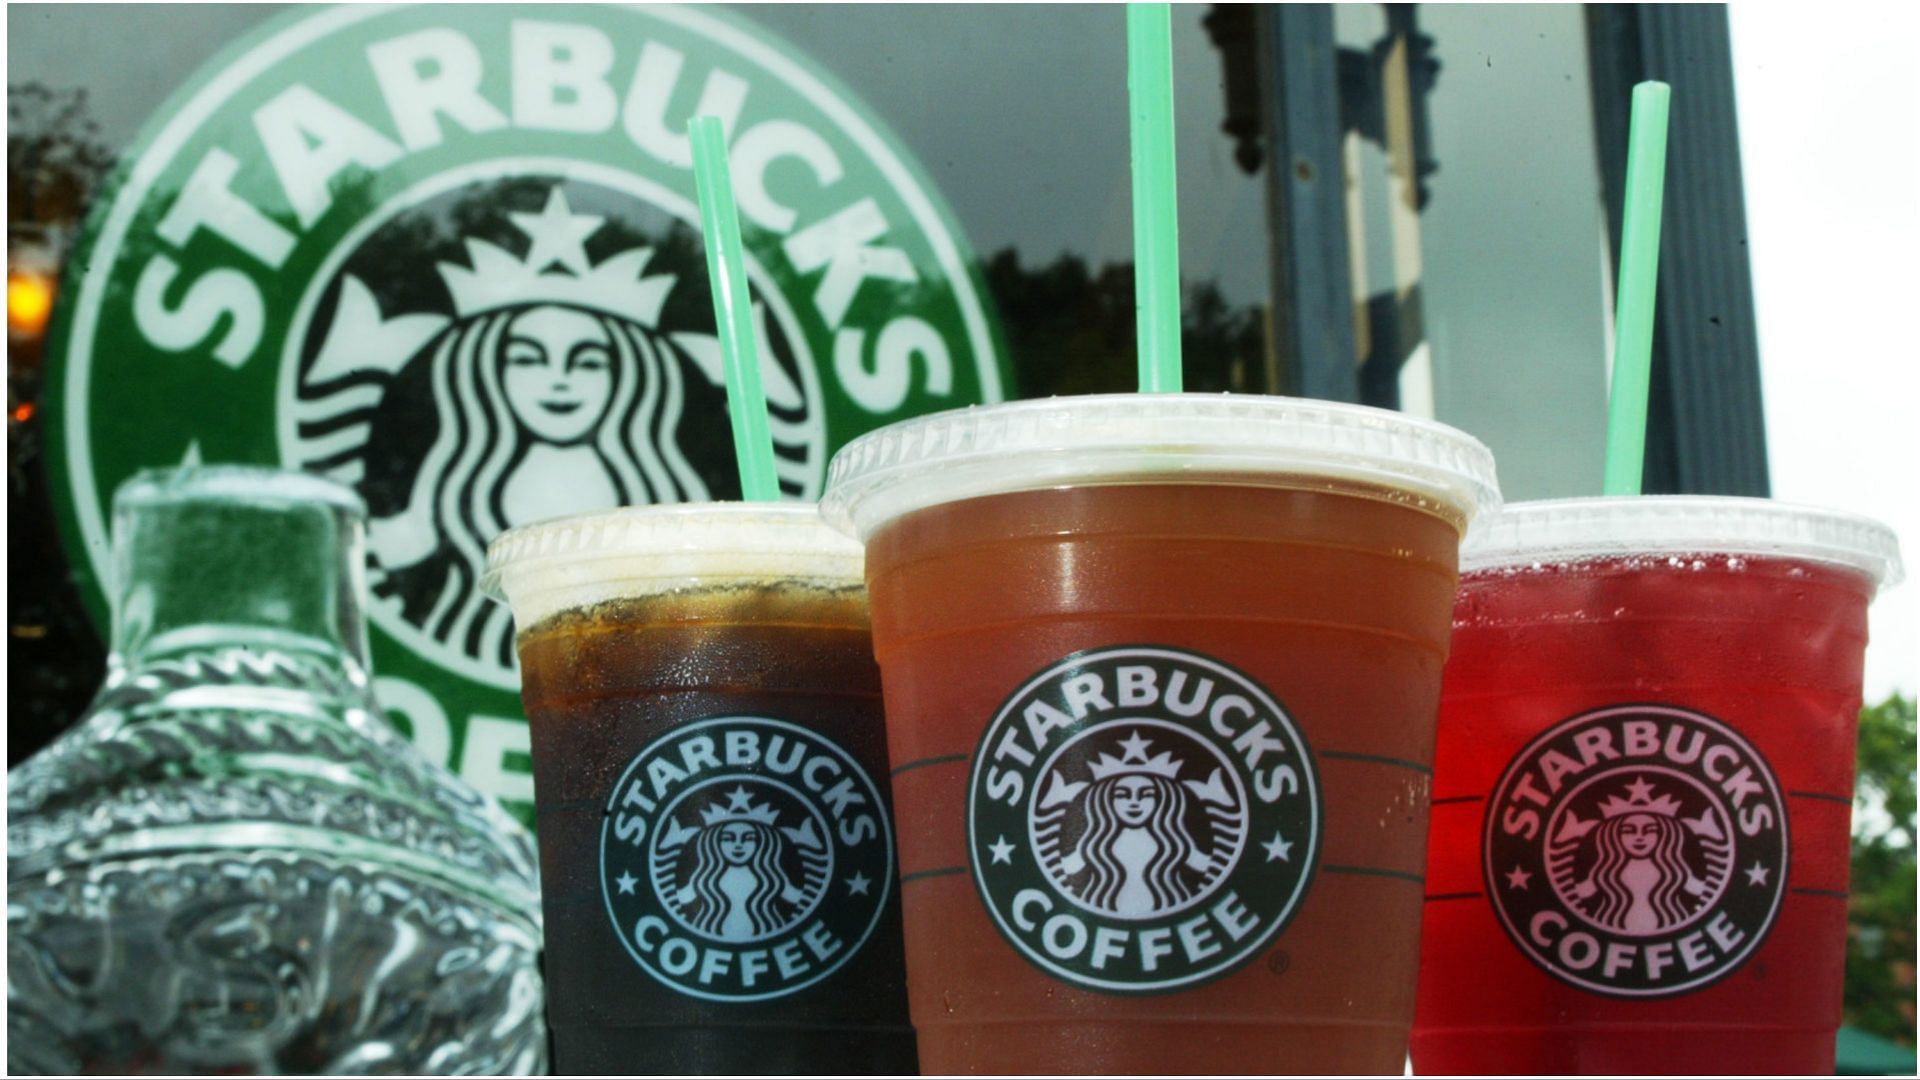 The Starbucks Summer 2023 menu was leaked ahead of time, expected to launch on May 9 (Image via Alex Wong/Getty Images)